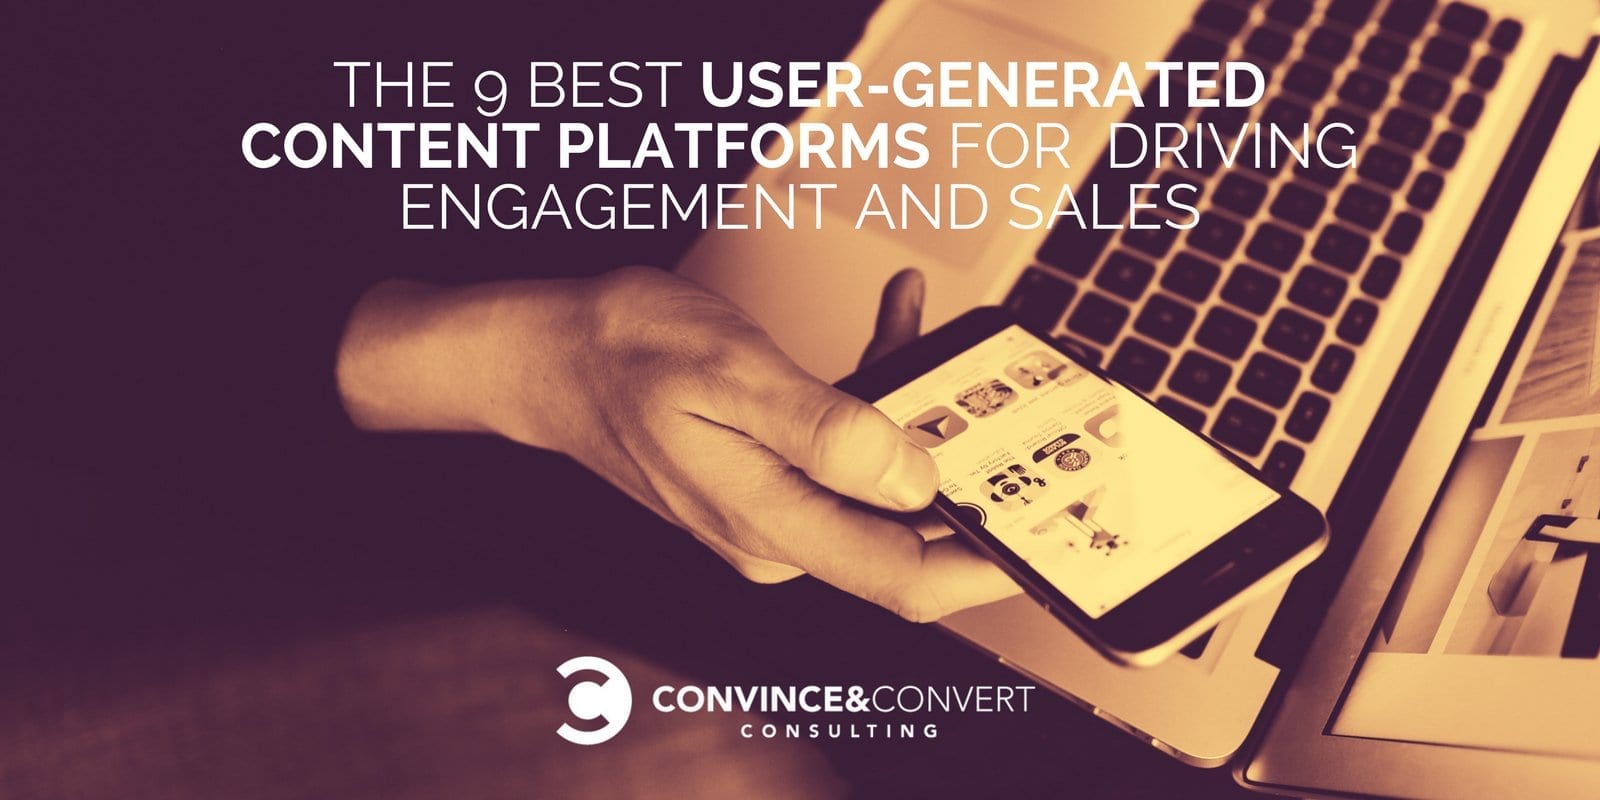 The-9-Best-User-Generated-Content-Platforms-for-Driving-Engagement-and-Sales.jpg